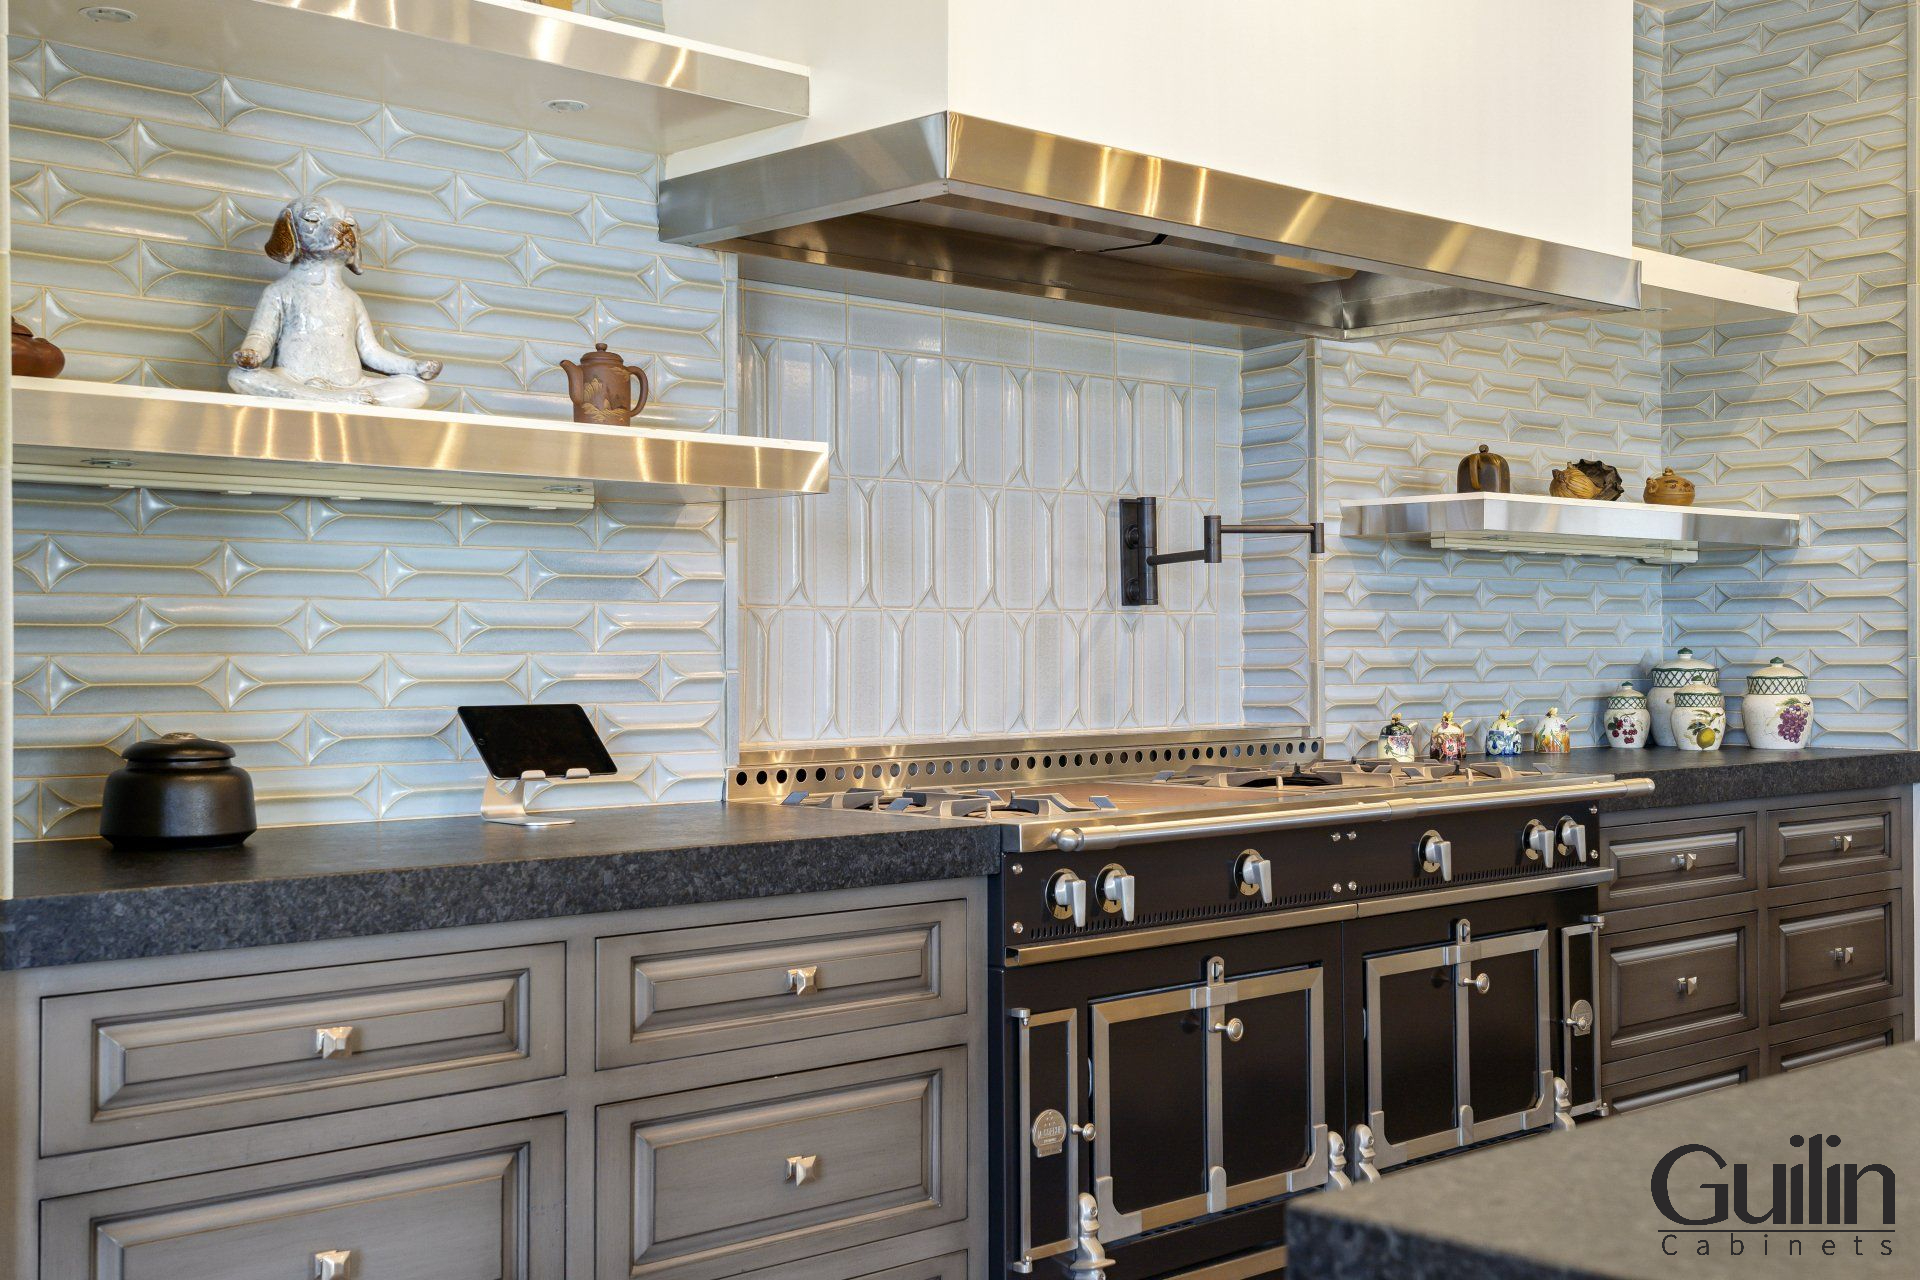 Classic accessories & Ornate detailing: Traditional style kitchens are often characterized by ornate detailing, muted colors, and classic designs. they help to add more luxury and timeless.